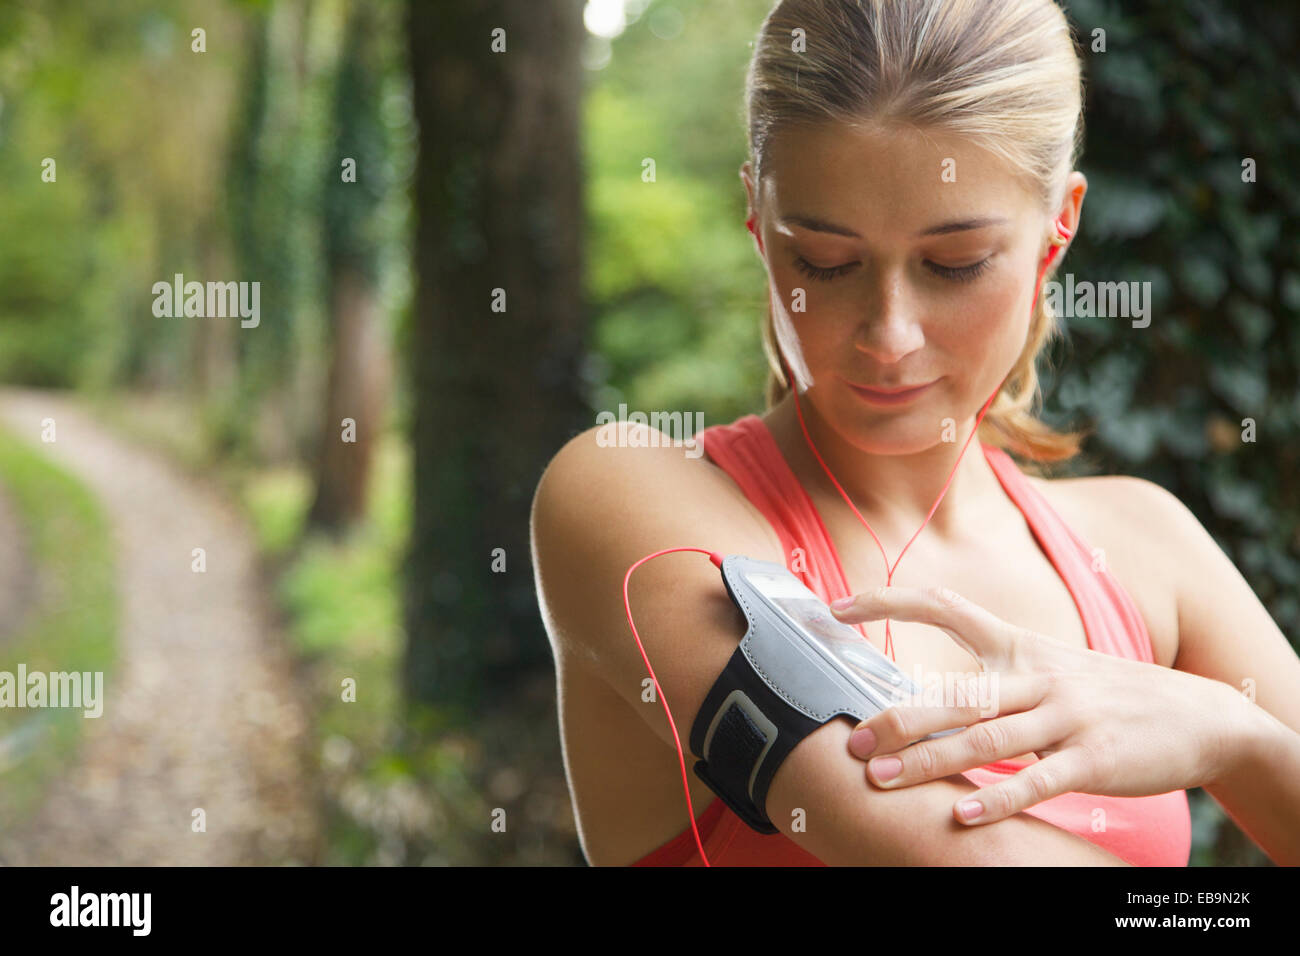 Woman Preparing Mp3 player for Work-out Stock Photo